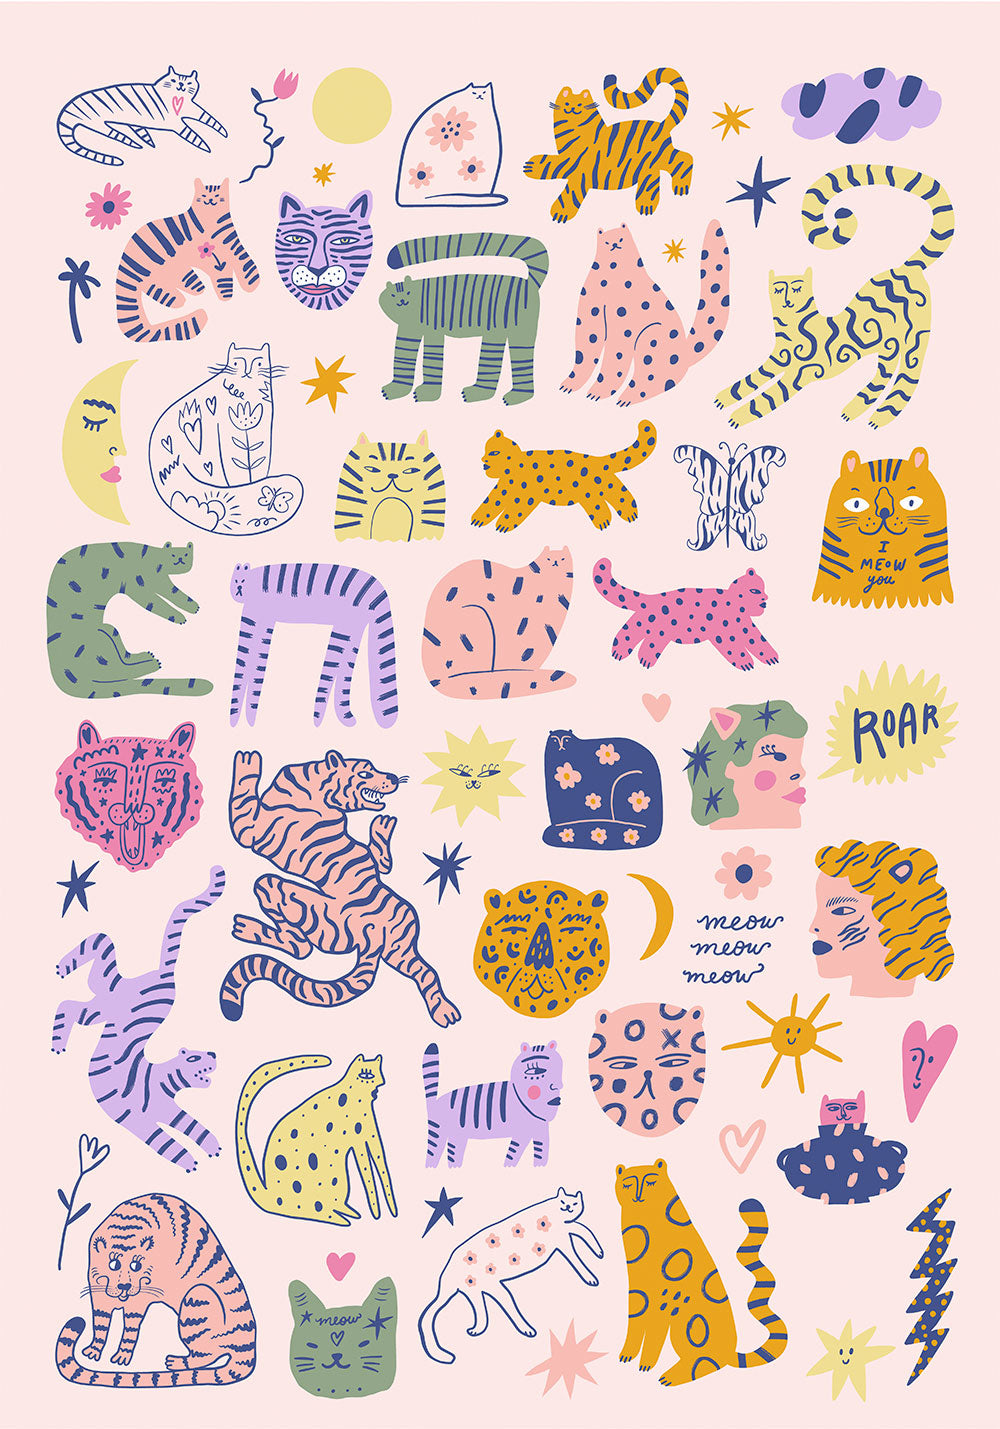 All the Cats Art Poster by Kuriosis